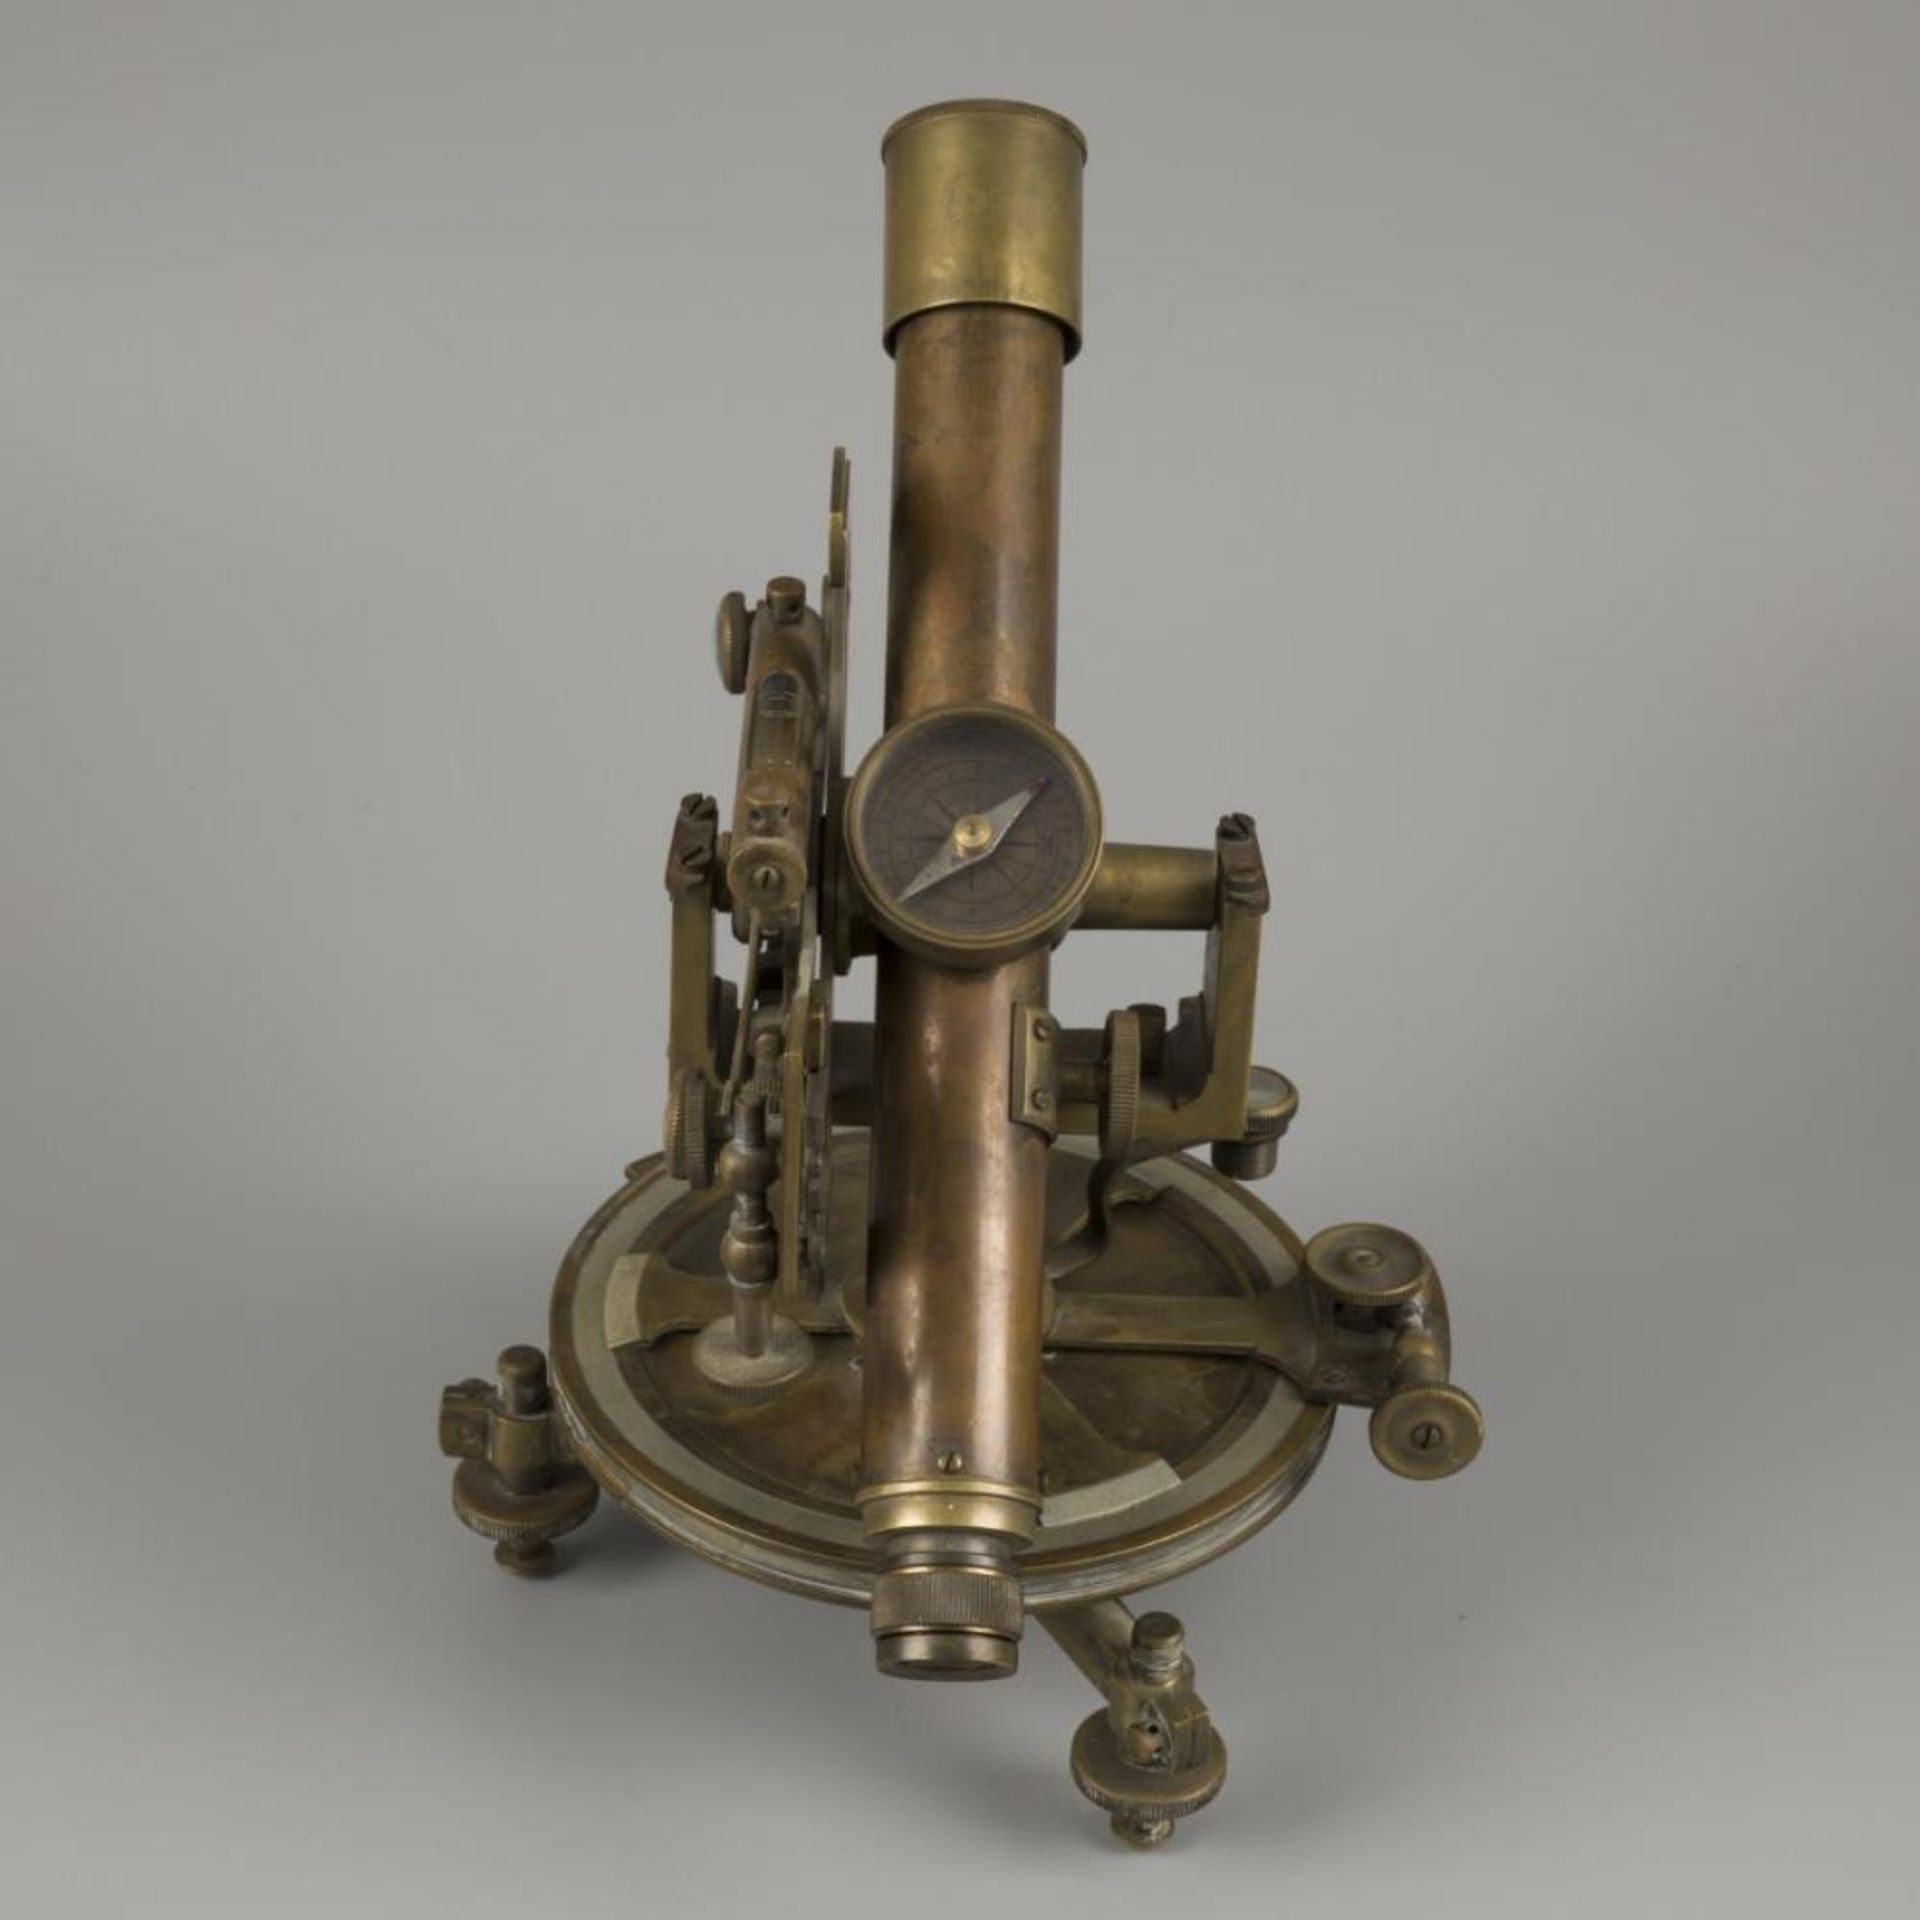 A brass surveyors' spirit level instrument with compass (transit/ theodolite), Germany, early 20th c - Image 3 of 4